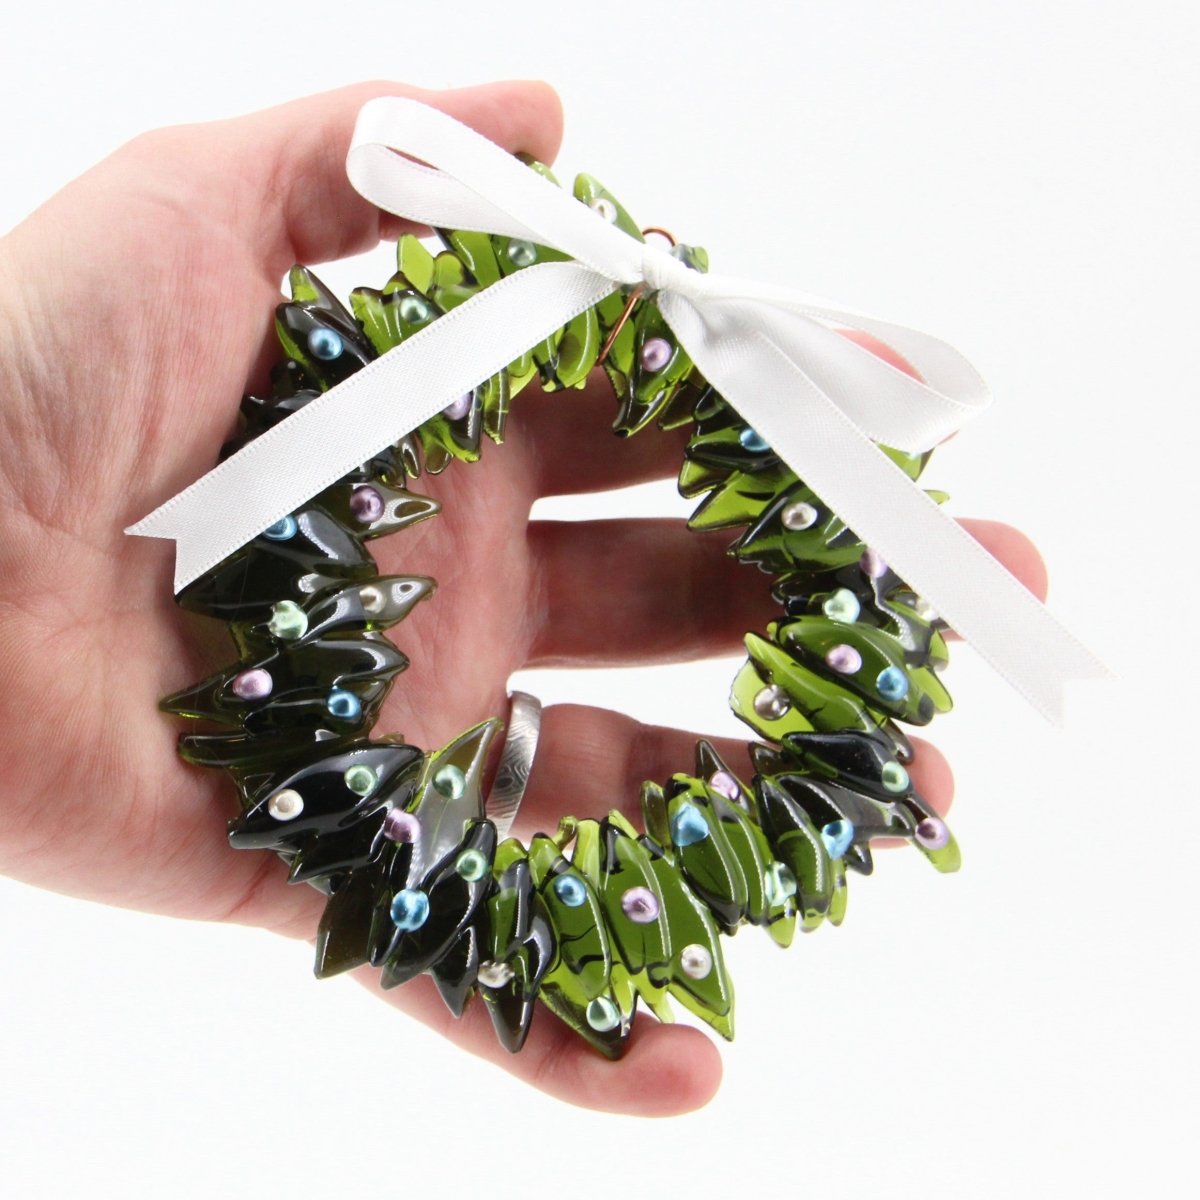 Christmas Tree Ornament from Upcycled Wine Bottle